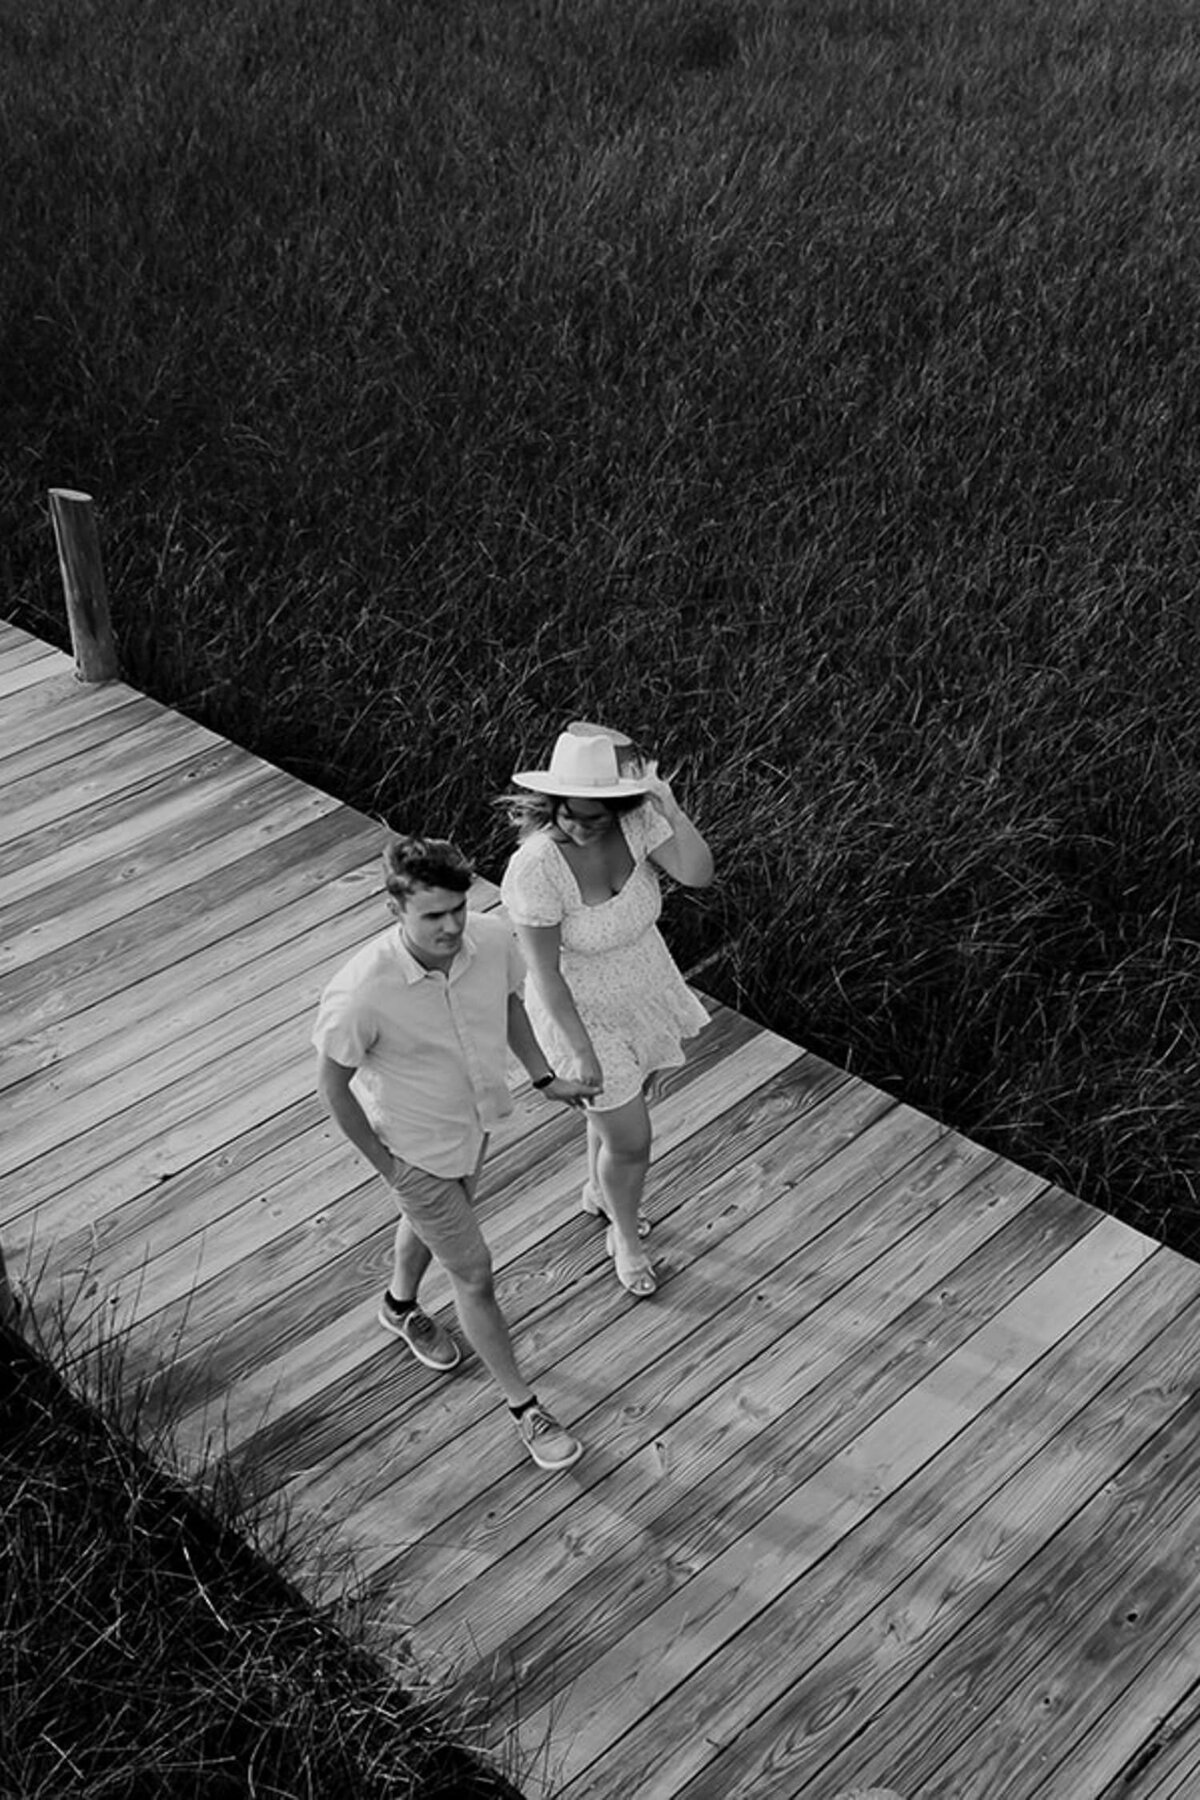 Couple walking in Palmetto Island County Park on wooden boardwalk. Photographed from above with drone. Woman is holding on to her hat